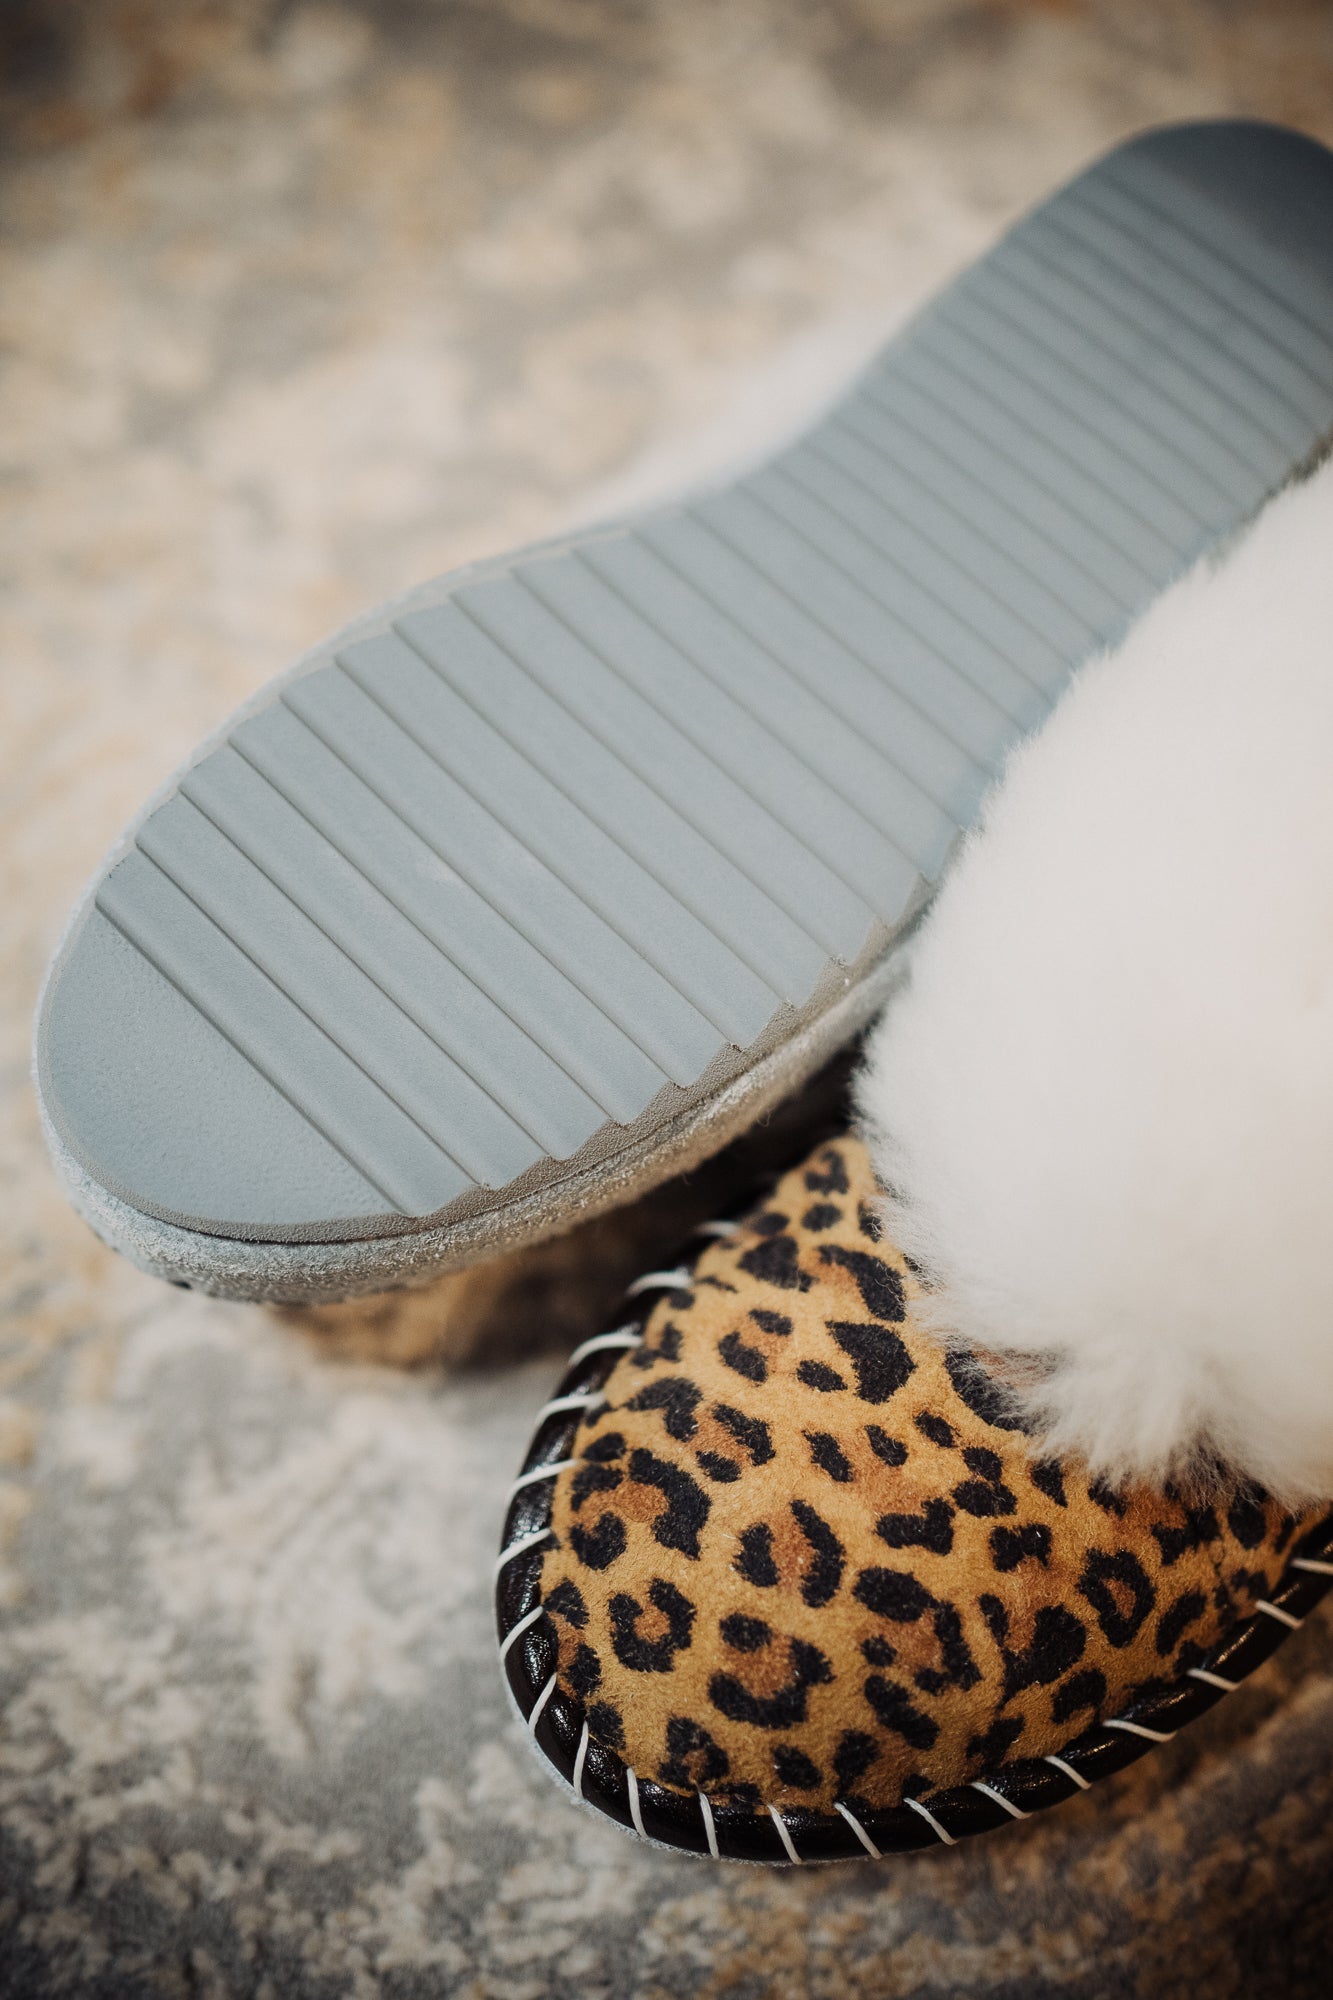 Rubber sole, natural leather s slippers with printed leopard pattern and white sheepskin furry and soft cuff